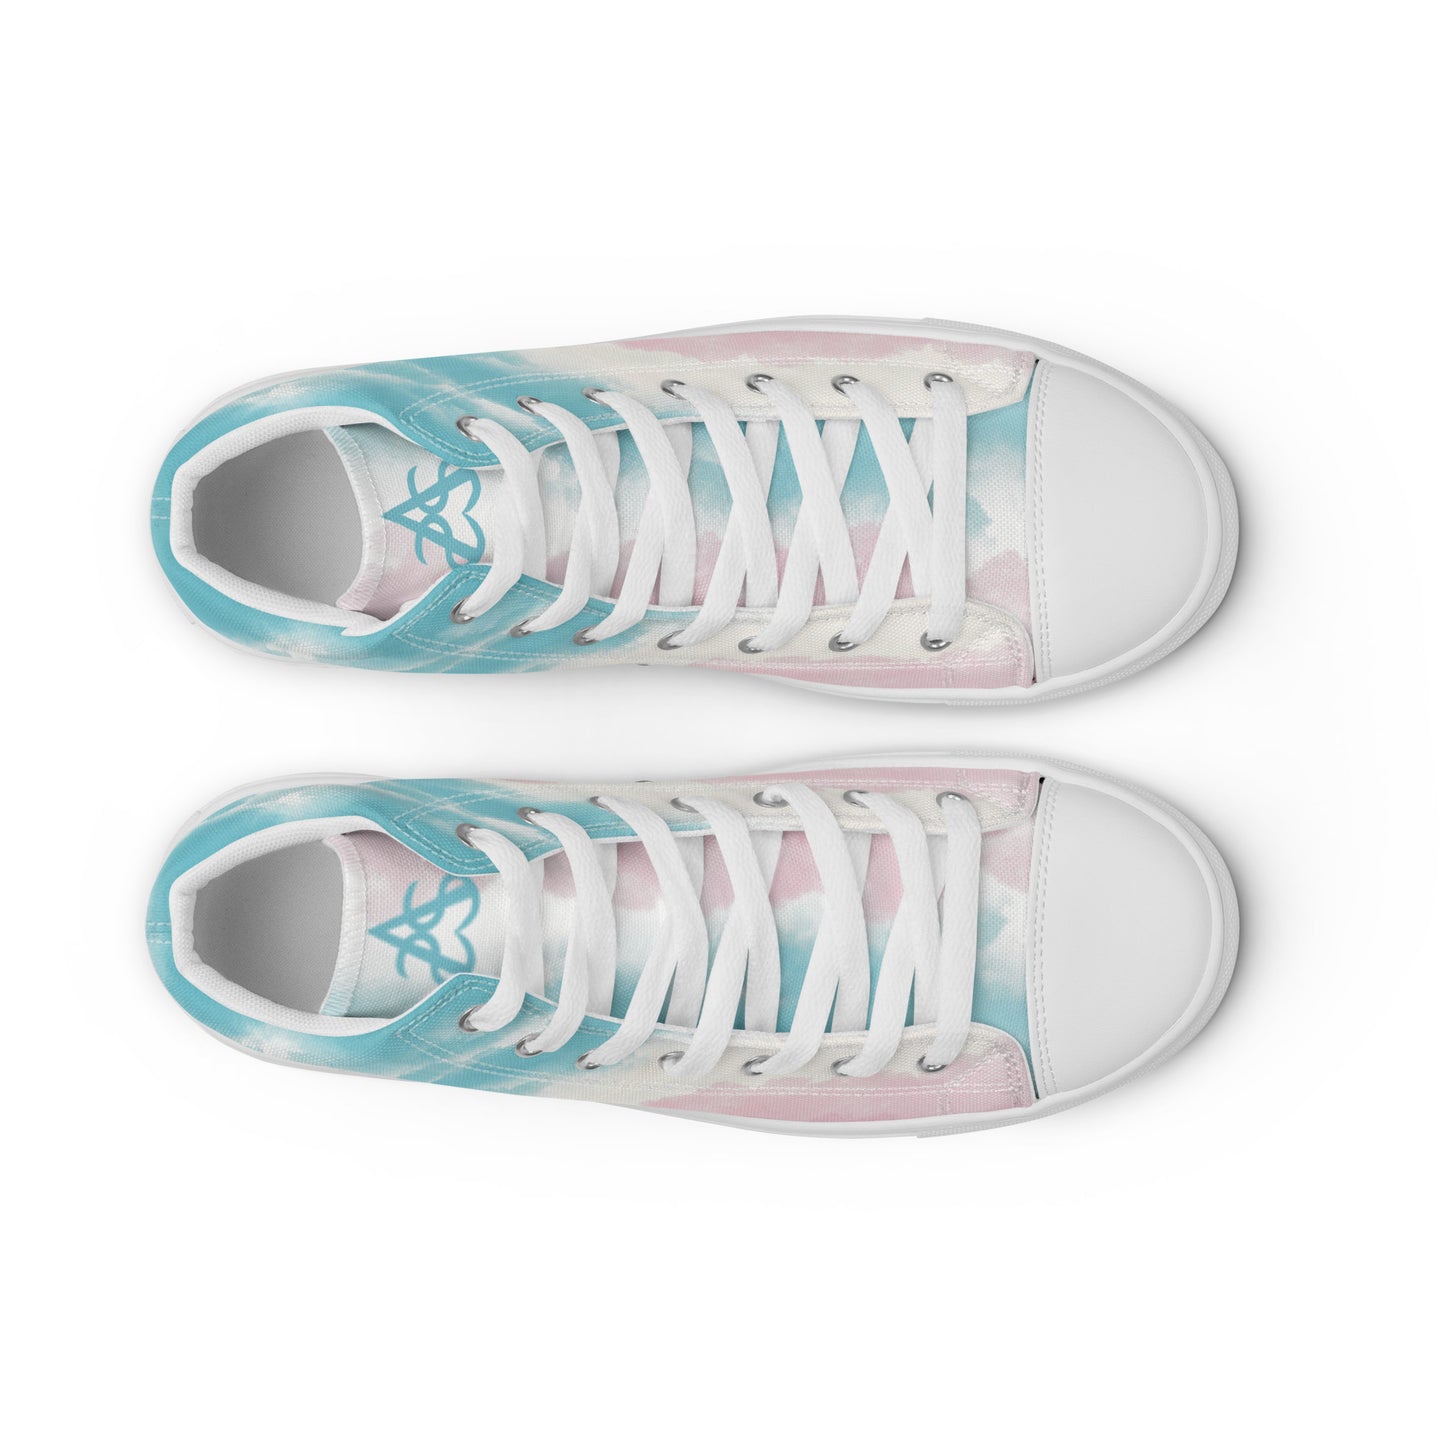 Top view: High top shoes with a cloudy design in blue, white, and pink has a doodle style heart on the heel, white shoe laces, and white details.